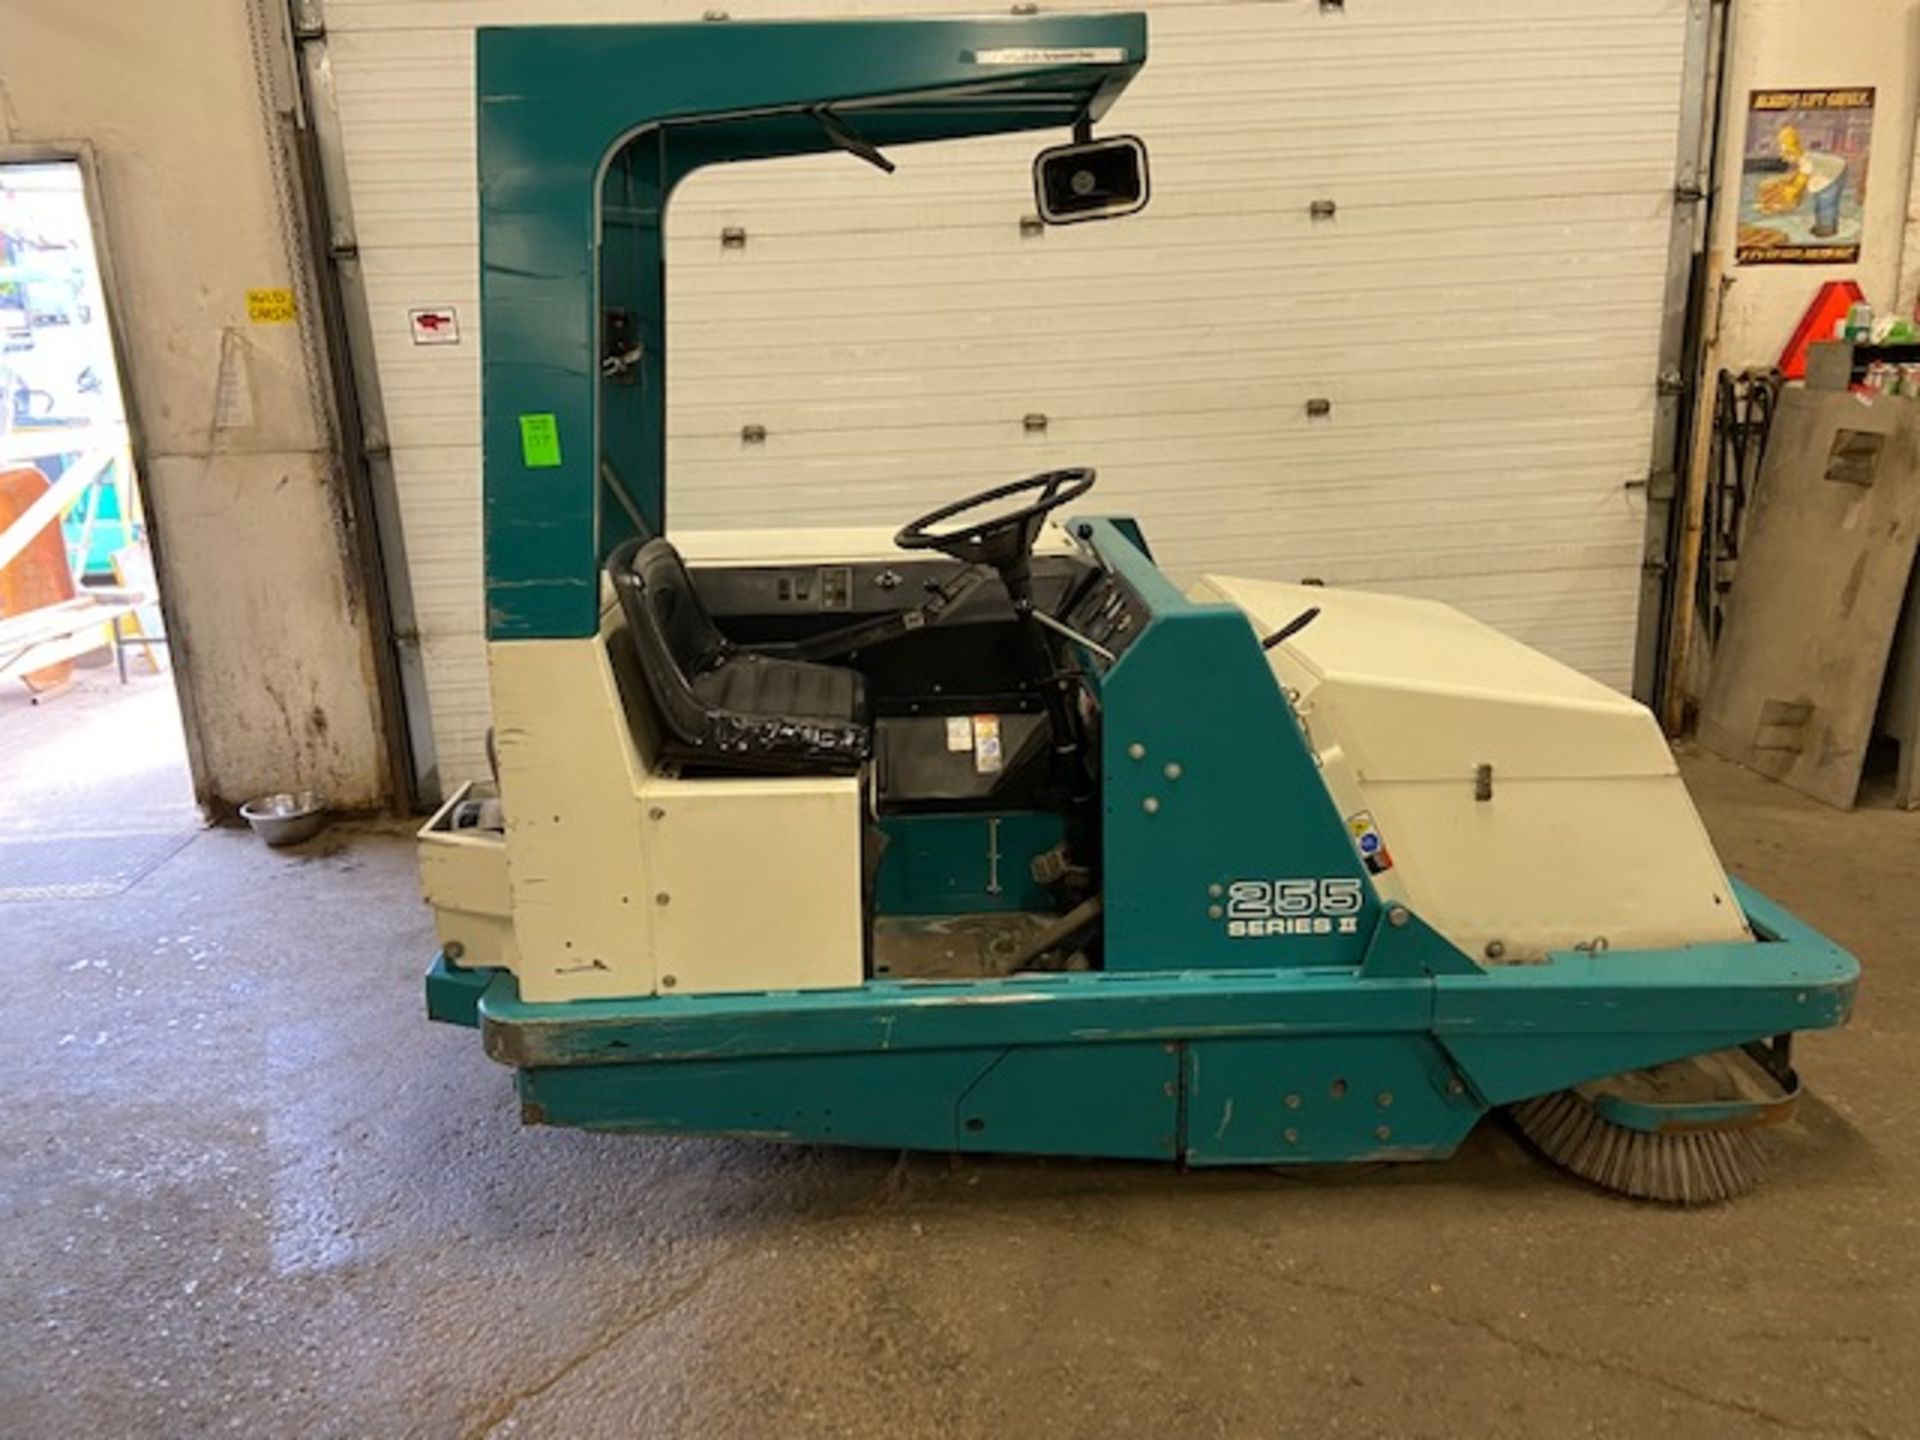 Tennant Ride On Sweeper Unit model 255II LPG (Propane powered) with LOW HOURS (no propane tank